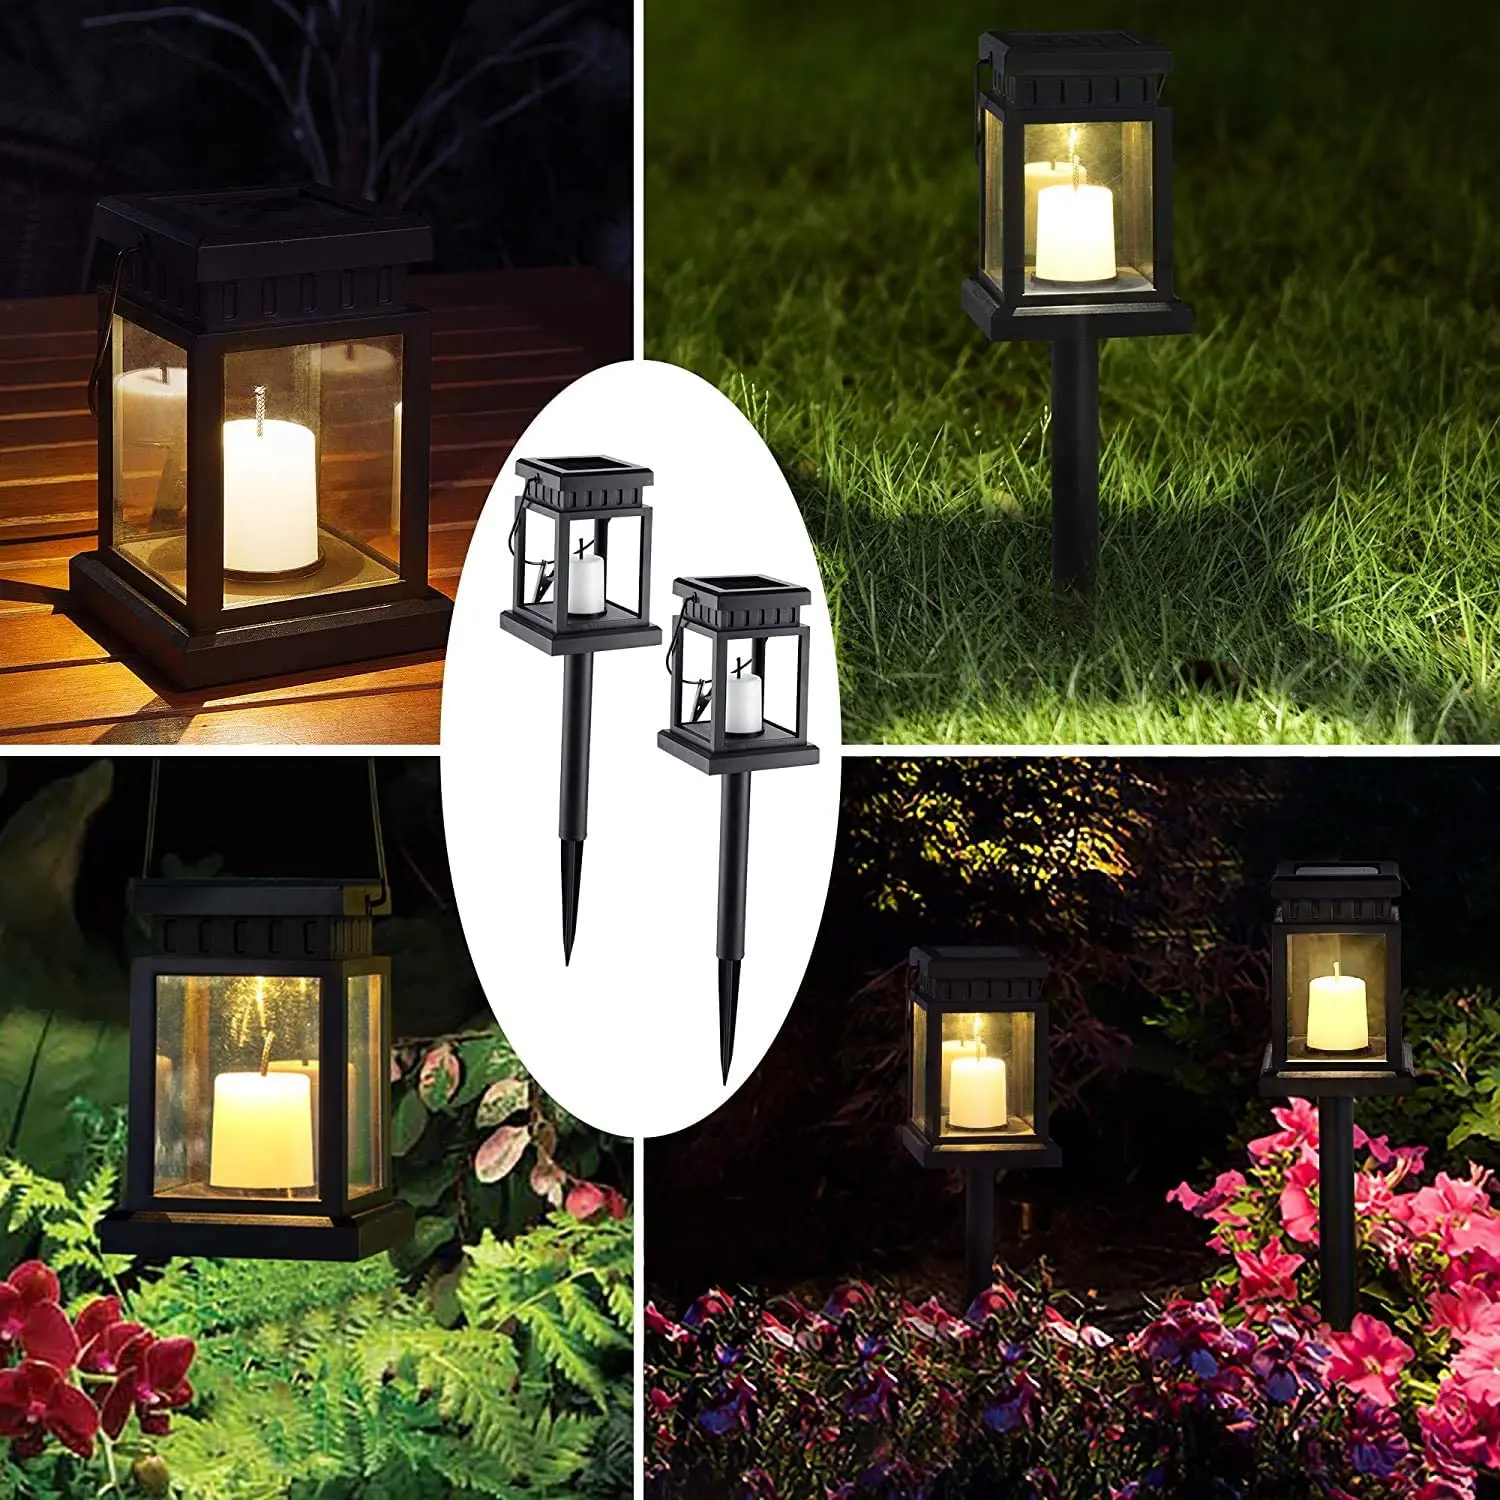 6Pack Solar Hanging Lanterns Outdoor Candle Effect Light with Stake for Garden Patio Lawn Deck Umbrella Tent Tree Yard images - 6